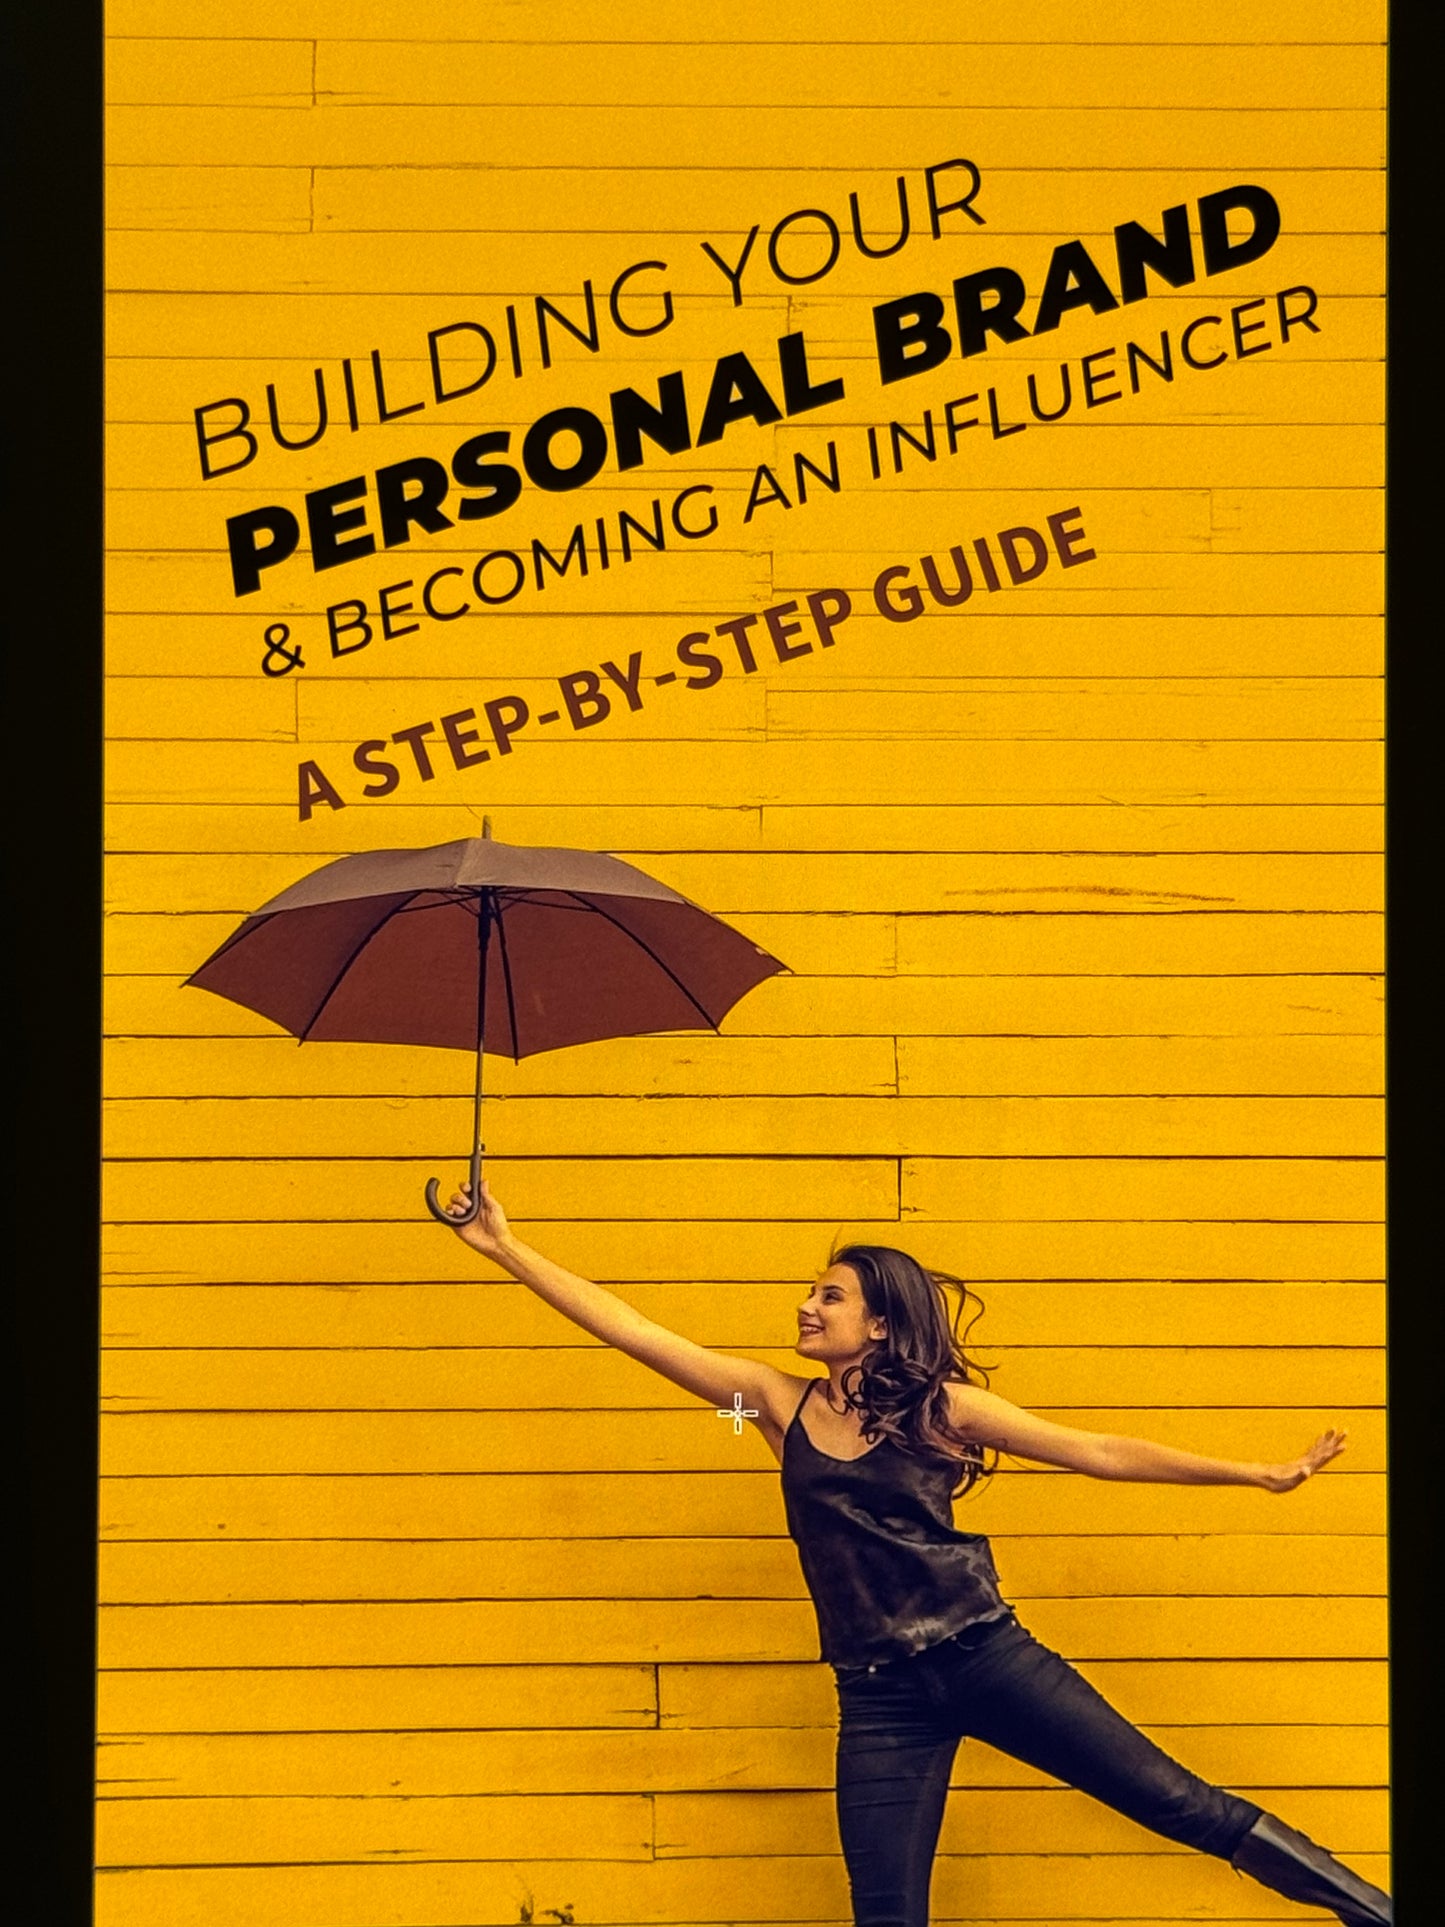 Building Your Brand and Becoming An Influencer A Step-By-Step Guide